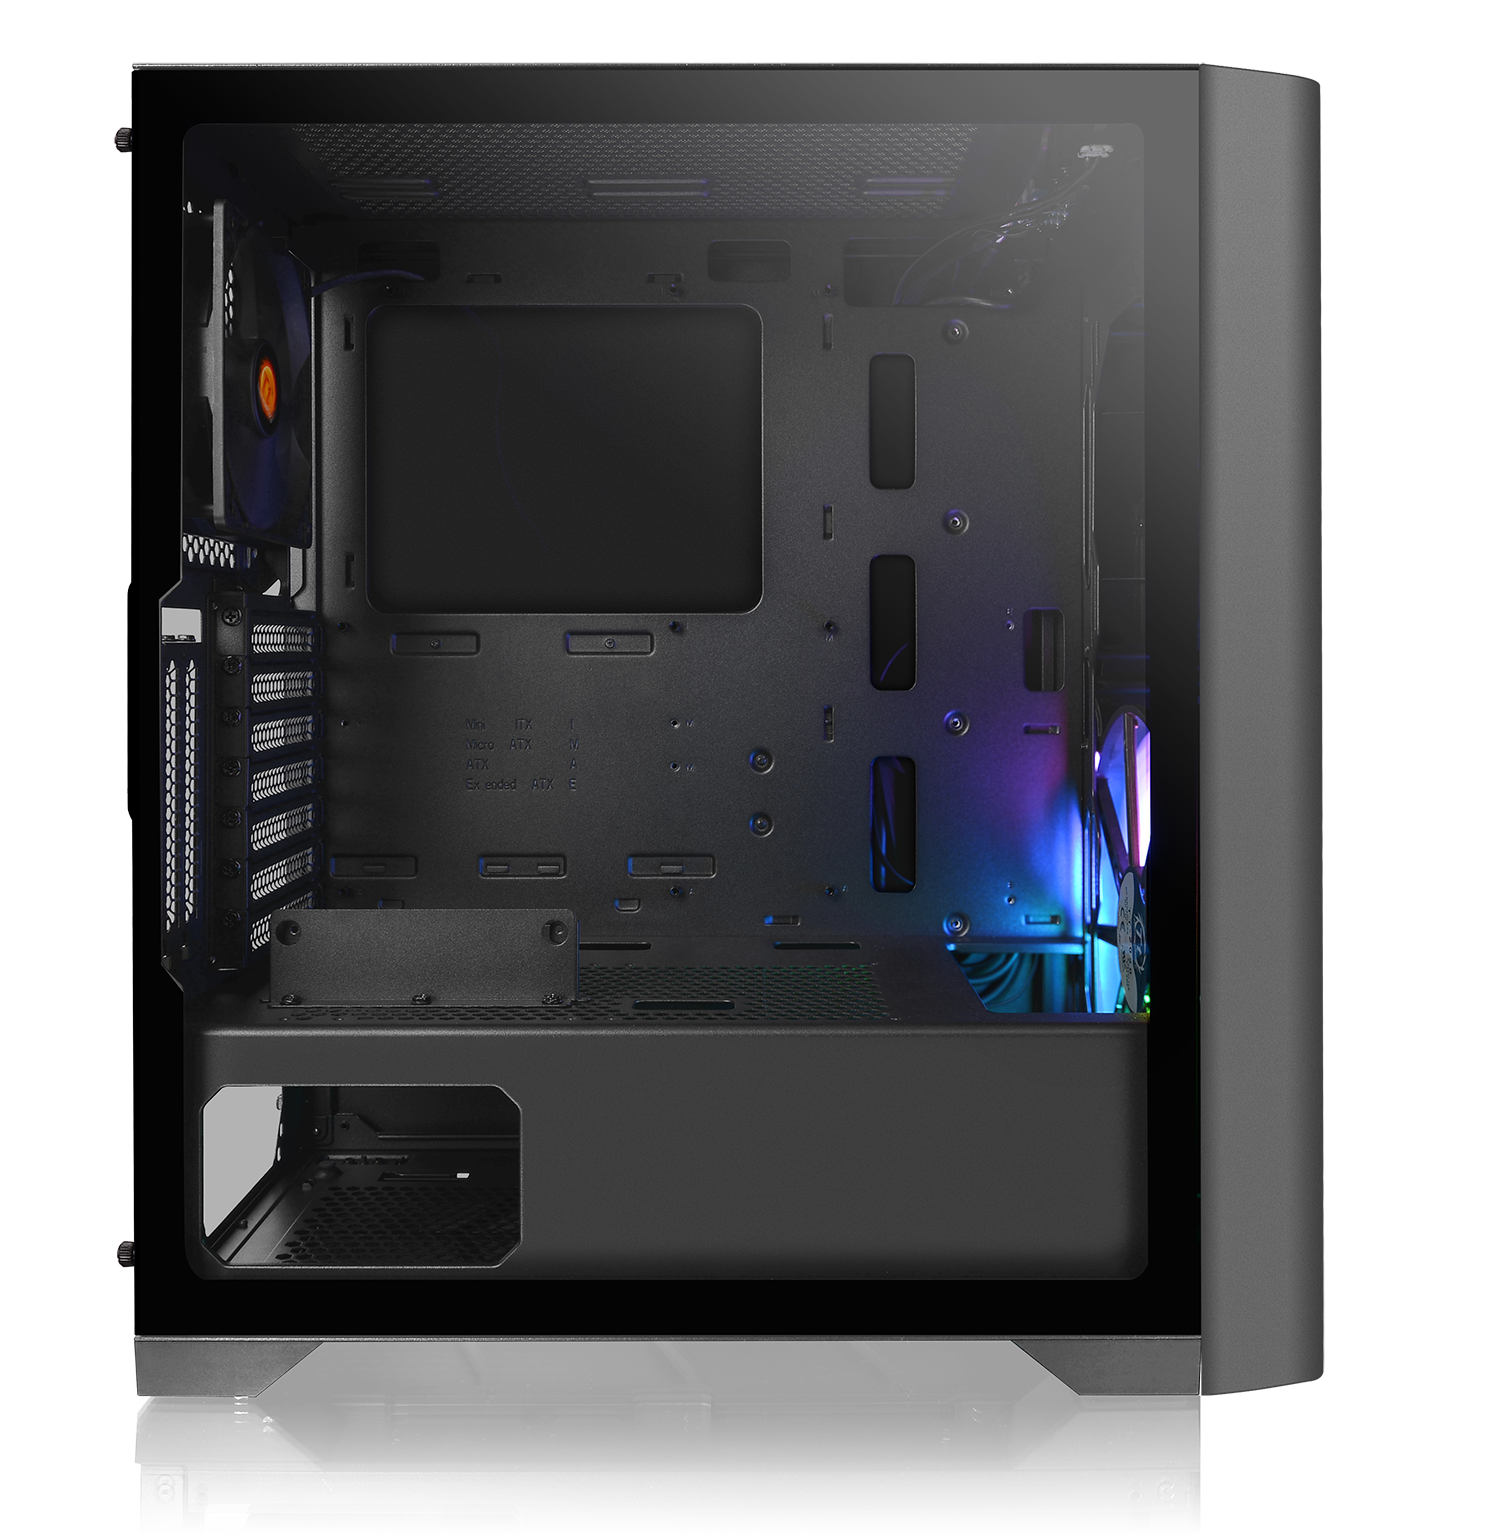 NdP - Thermaltake Nueva Serie Commander G Cristal Templado ARGB Mid-Tower Chassis